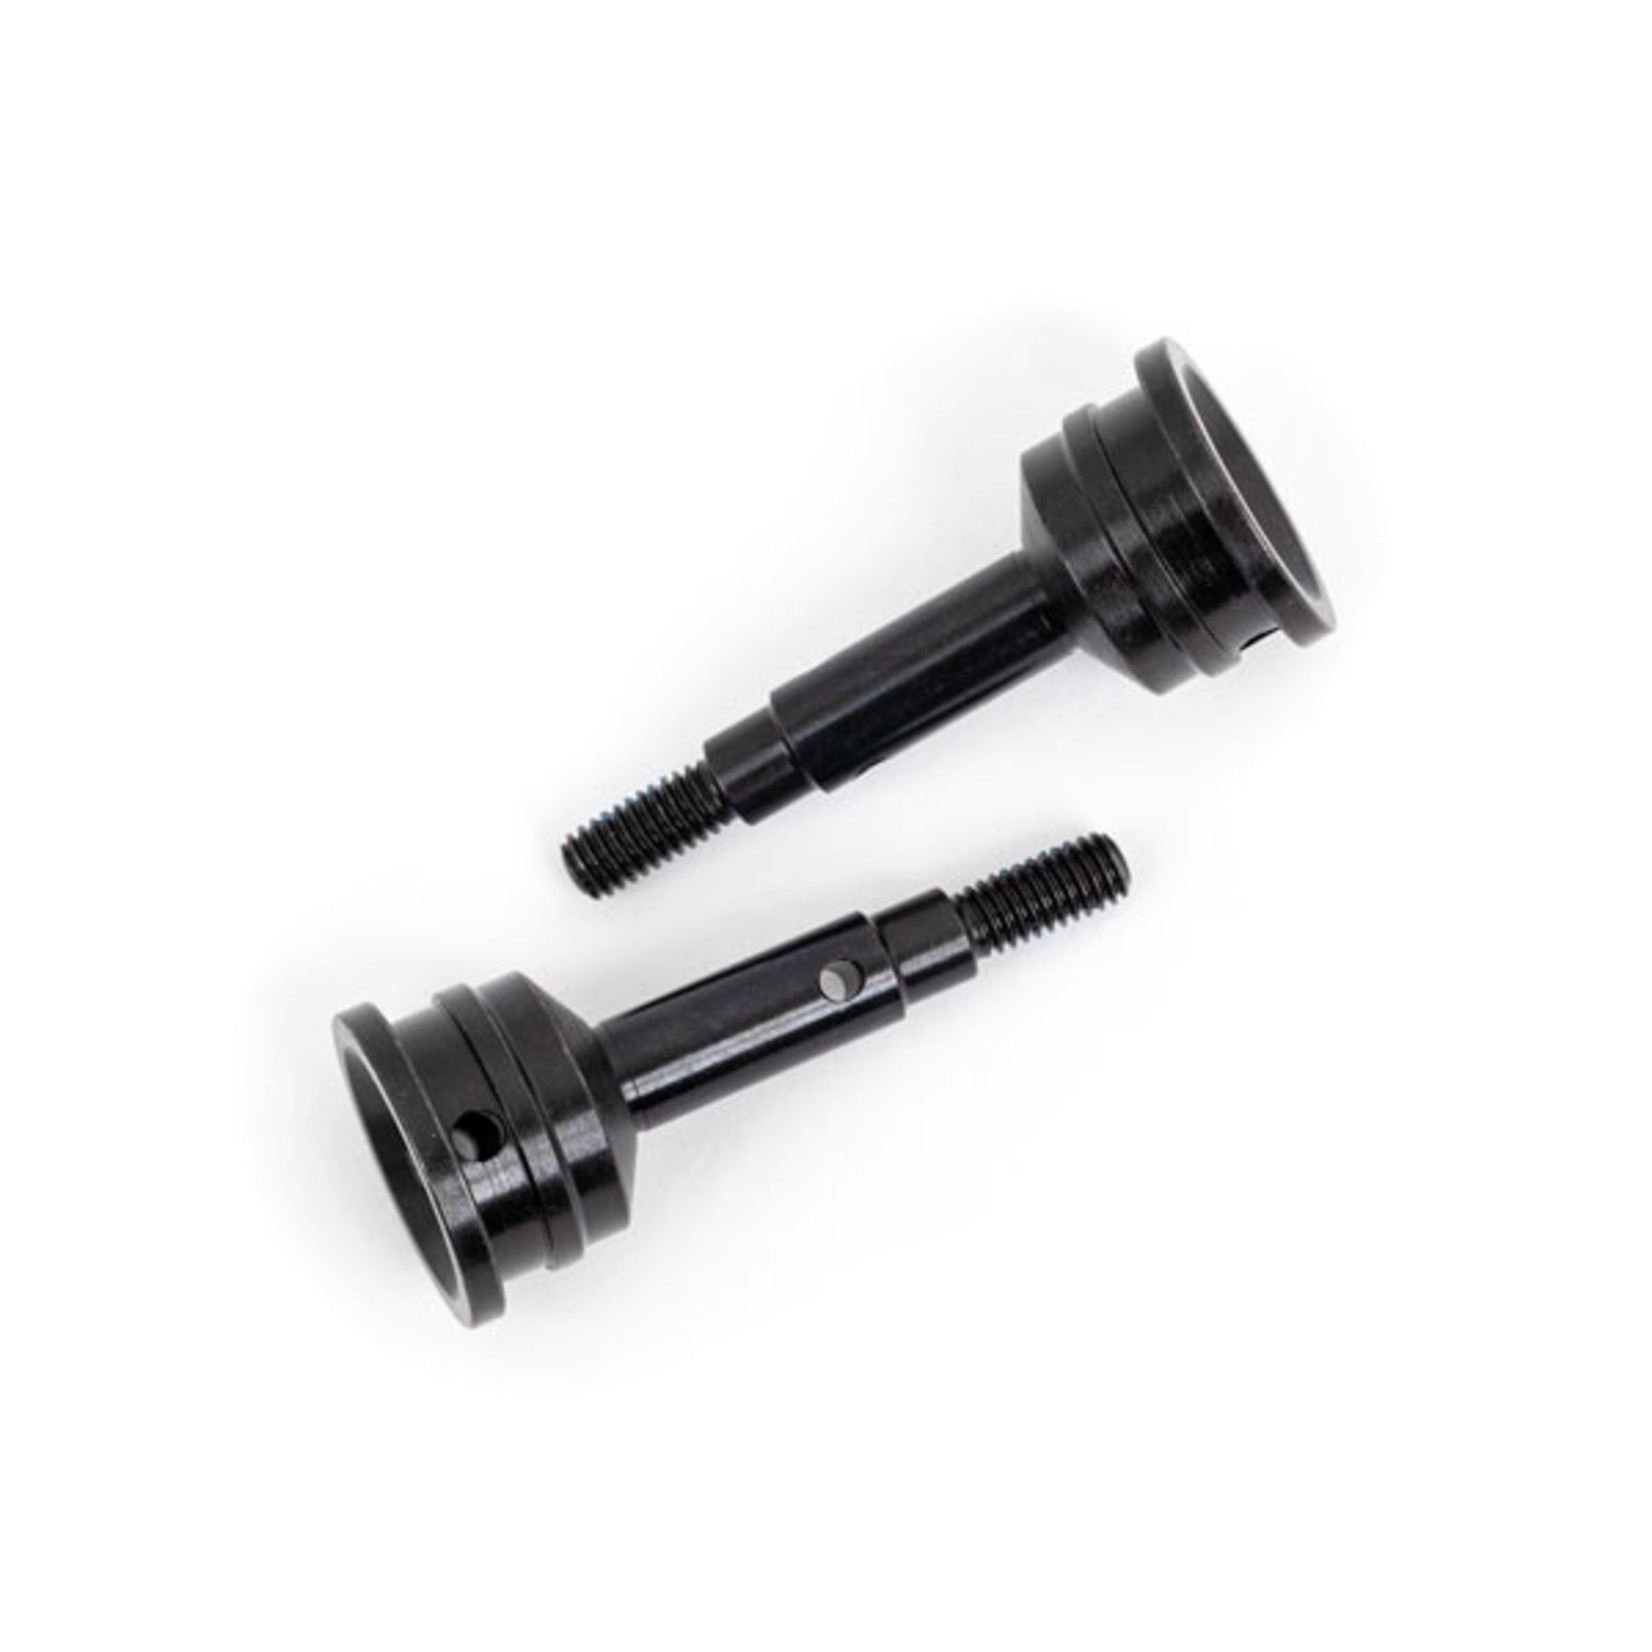 Traxxas 9054 - Stub axle, front, 6mm, extreme heavy duty (